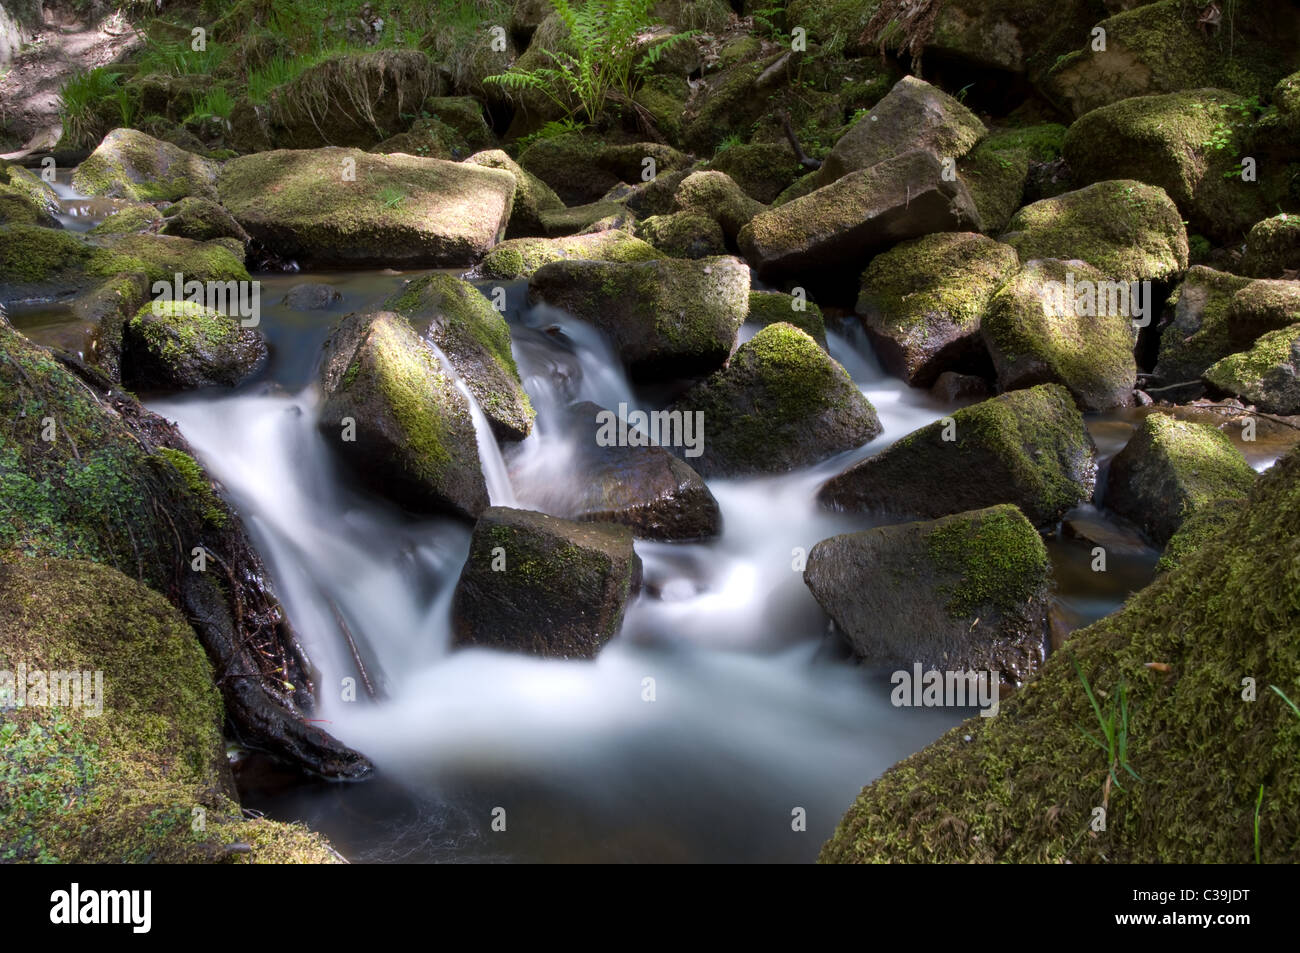 Stream running through Padley Gorge on the Longshaw Estate in the Peak District over Rocks Stock Photo